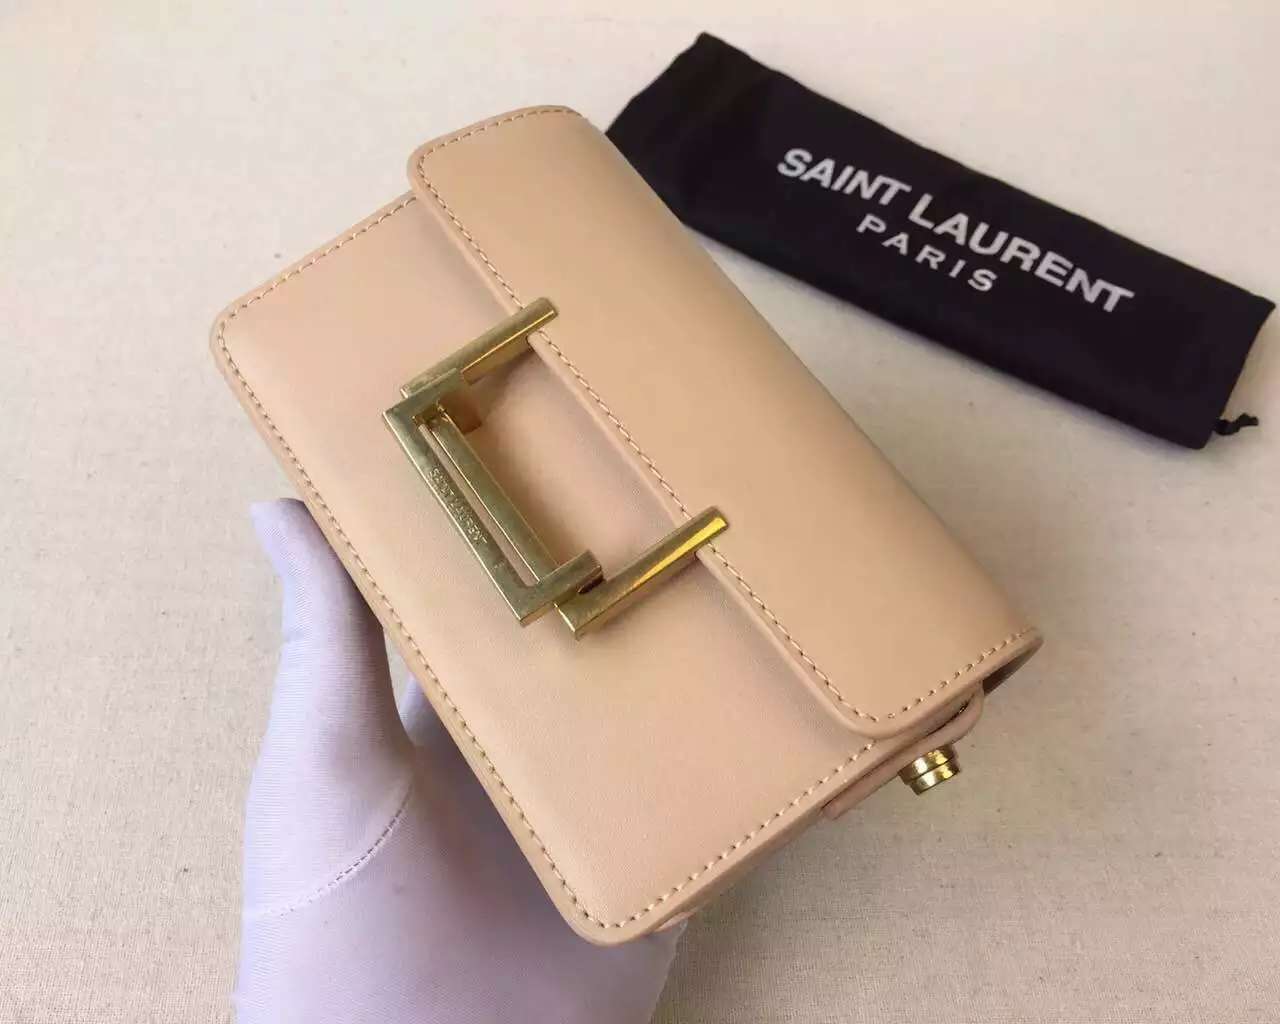 2015 Cheap YSL Out-Sale with Free Shipping-Saint Laurent Classic Small Lulu Leather Bag in Apricot Calfskin Leather - Click Image to Close